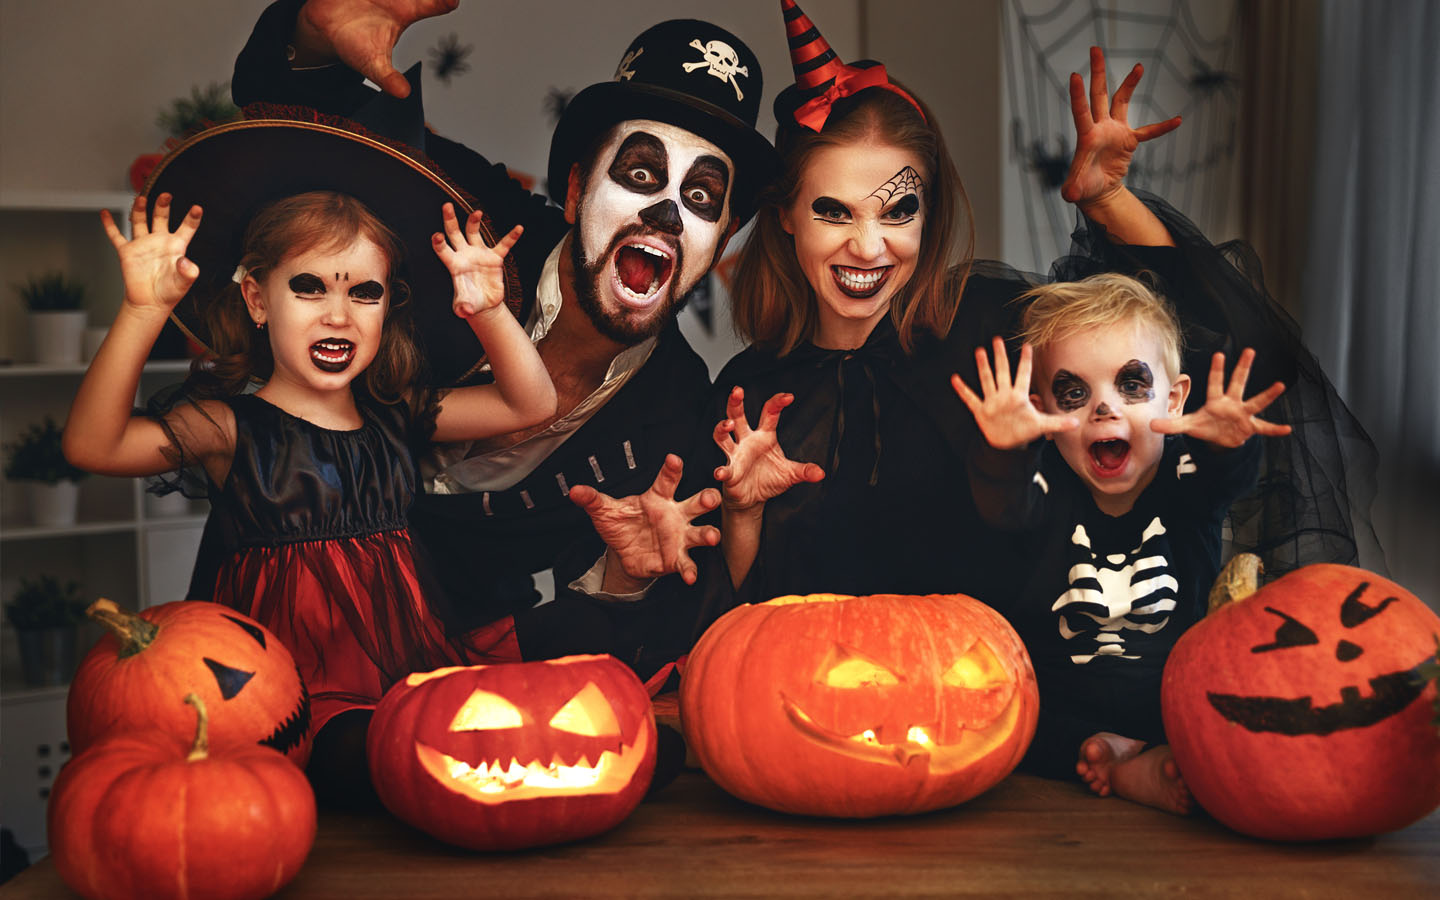 halloween costume ideas at home: family in costumes